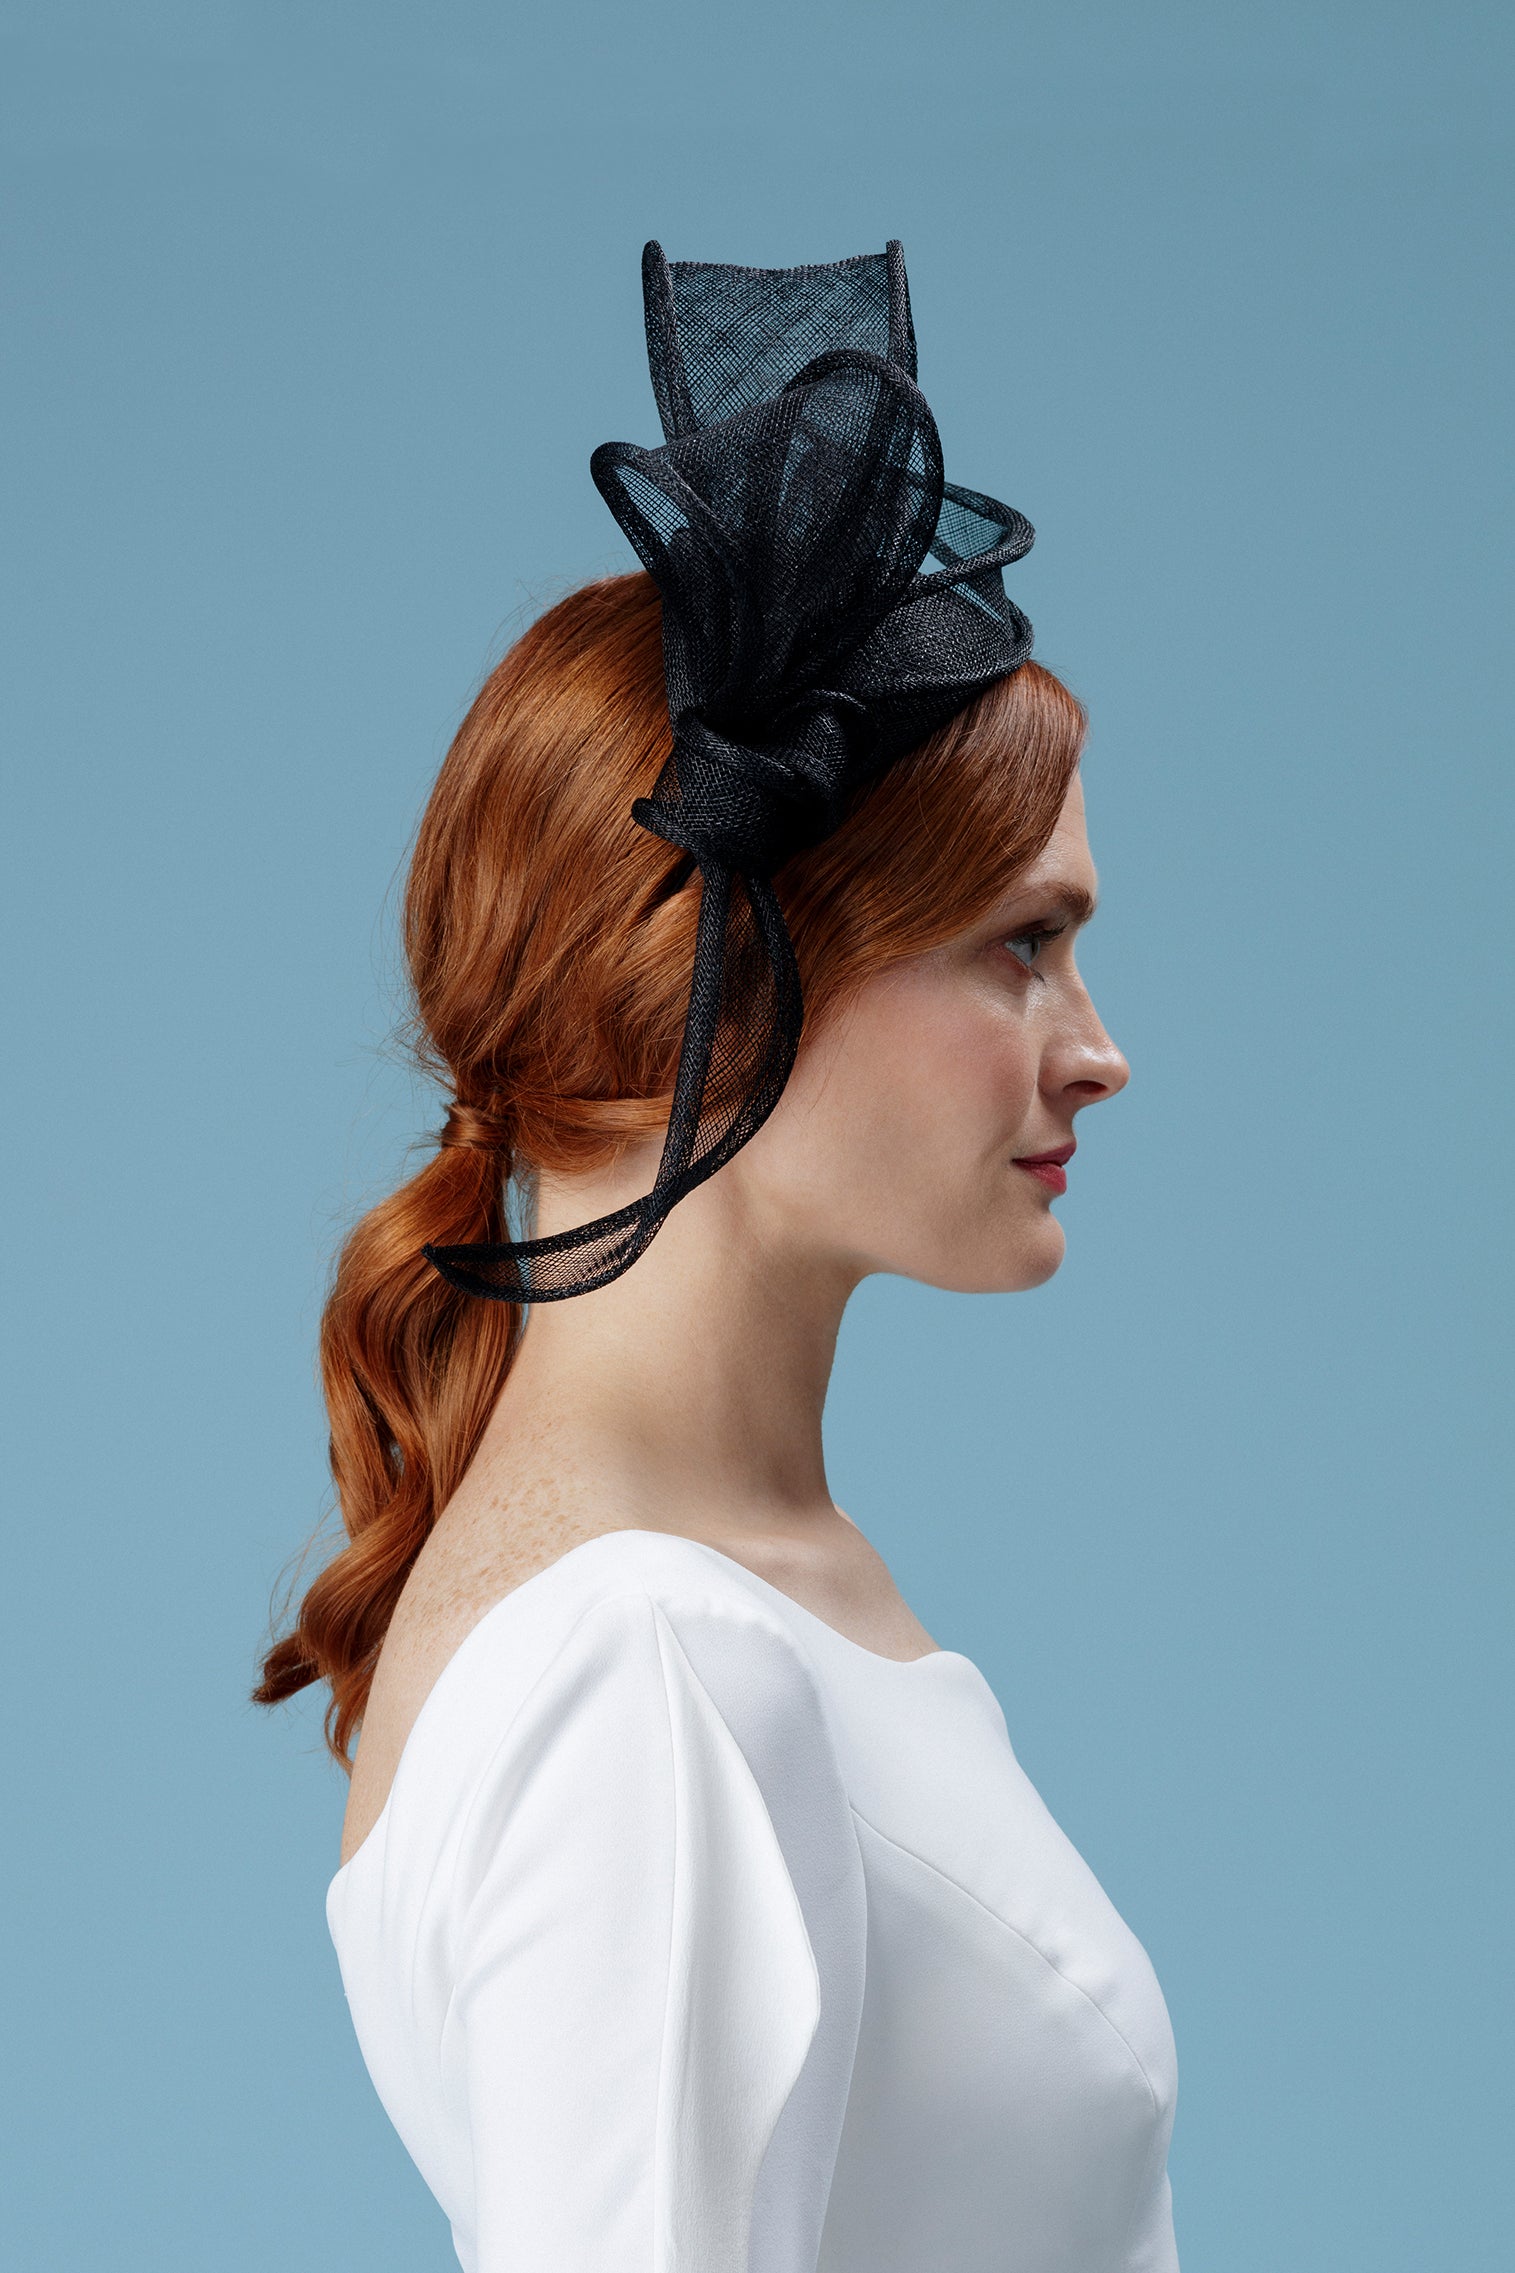 Rosemary Black Headband - Lock Couture by Awon Golding - Lock & Co. Hatters London UK